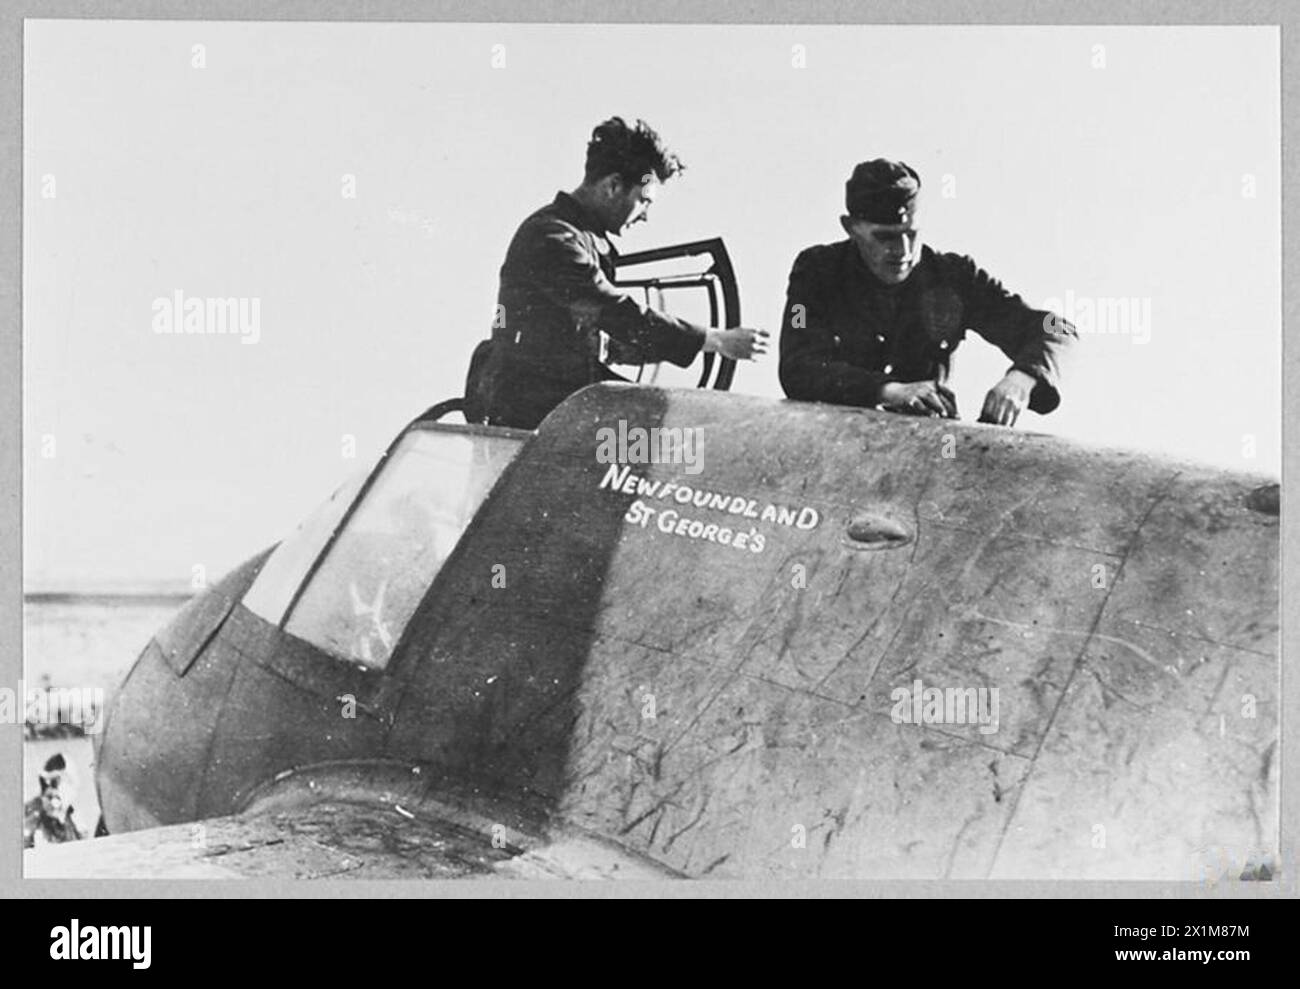 R.A.F. BEAUFIGHTERS NAMED AFTER NEWFOUNDLAND PROVINCES AND TOWNS [NEWFOUNDLAND SQUADRON] - Two of the ground crew servicing 'ST.GEORGE'S' - a named Beaufighter. Corporal G.Marsh from Grand Falls (left), and LAC John Martin, harness maker from Bell Island, Royal Air Force Stock Photo